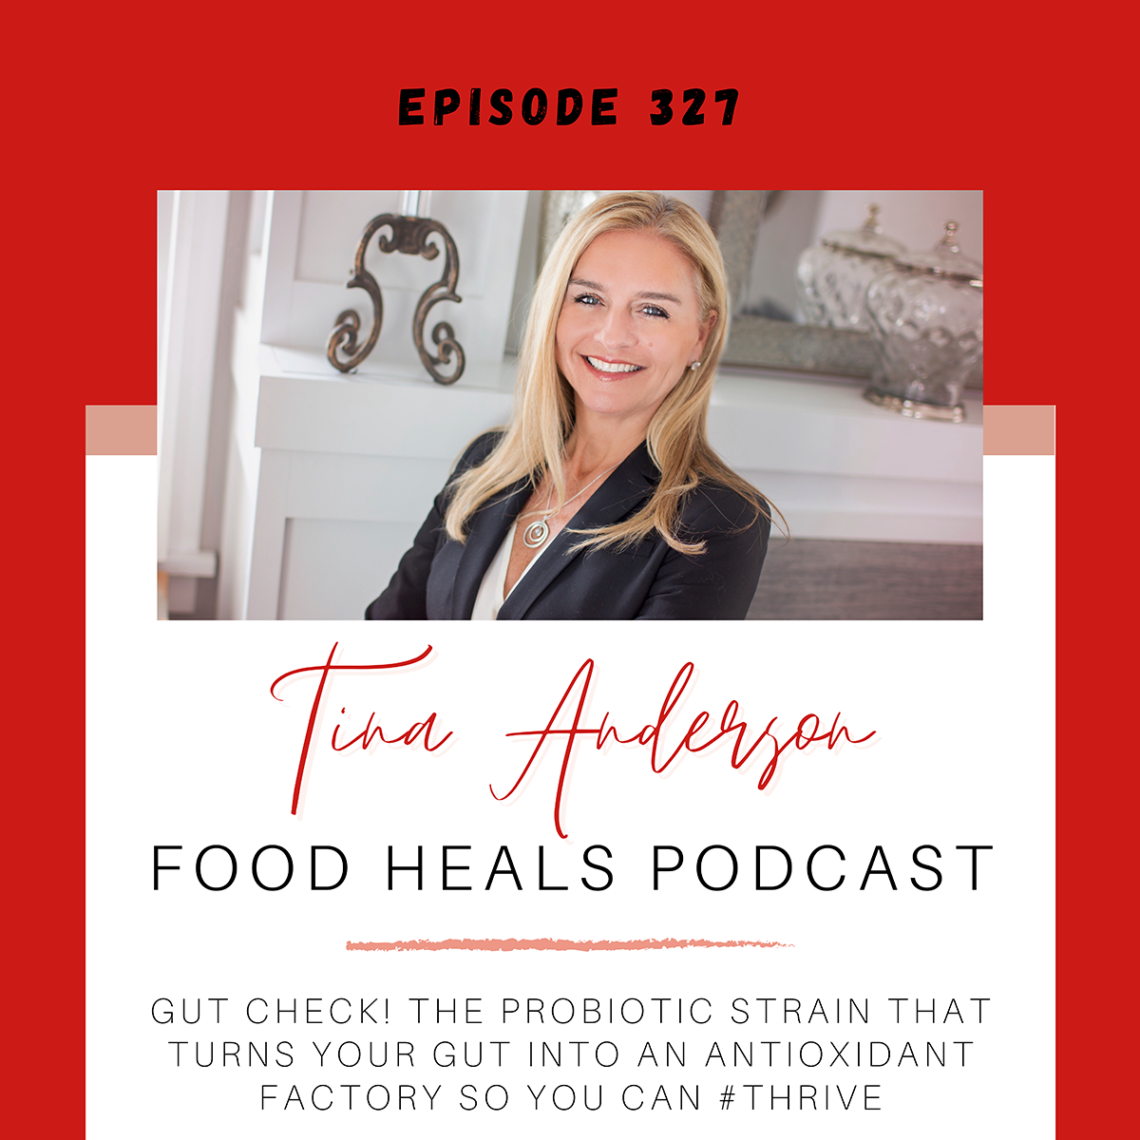 Tina Anderson, Founder of Just Thrive Health is back on The Food Heals Podcast with Allison Melody